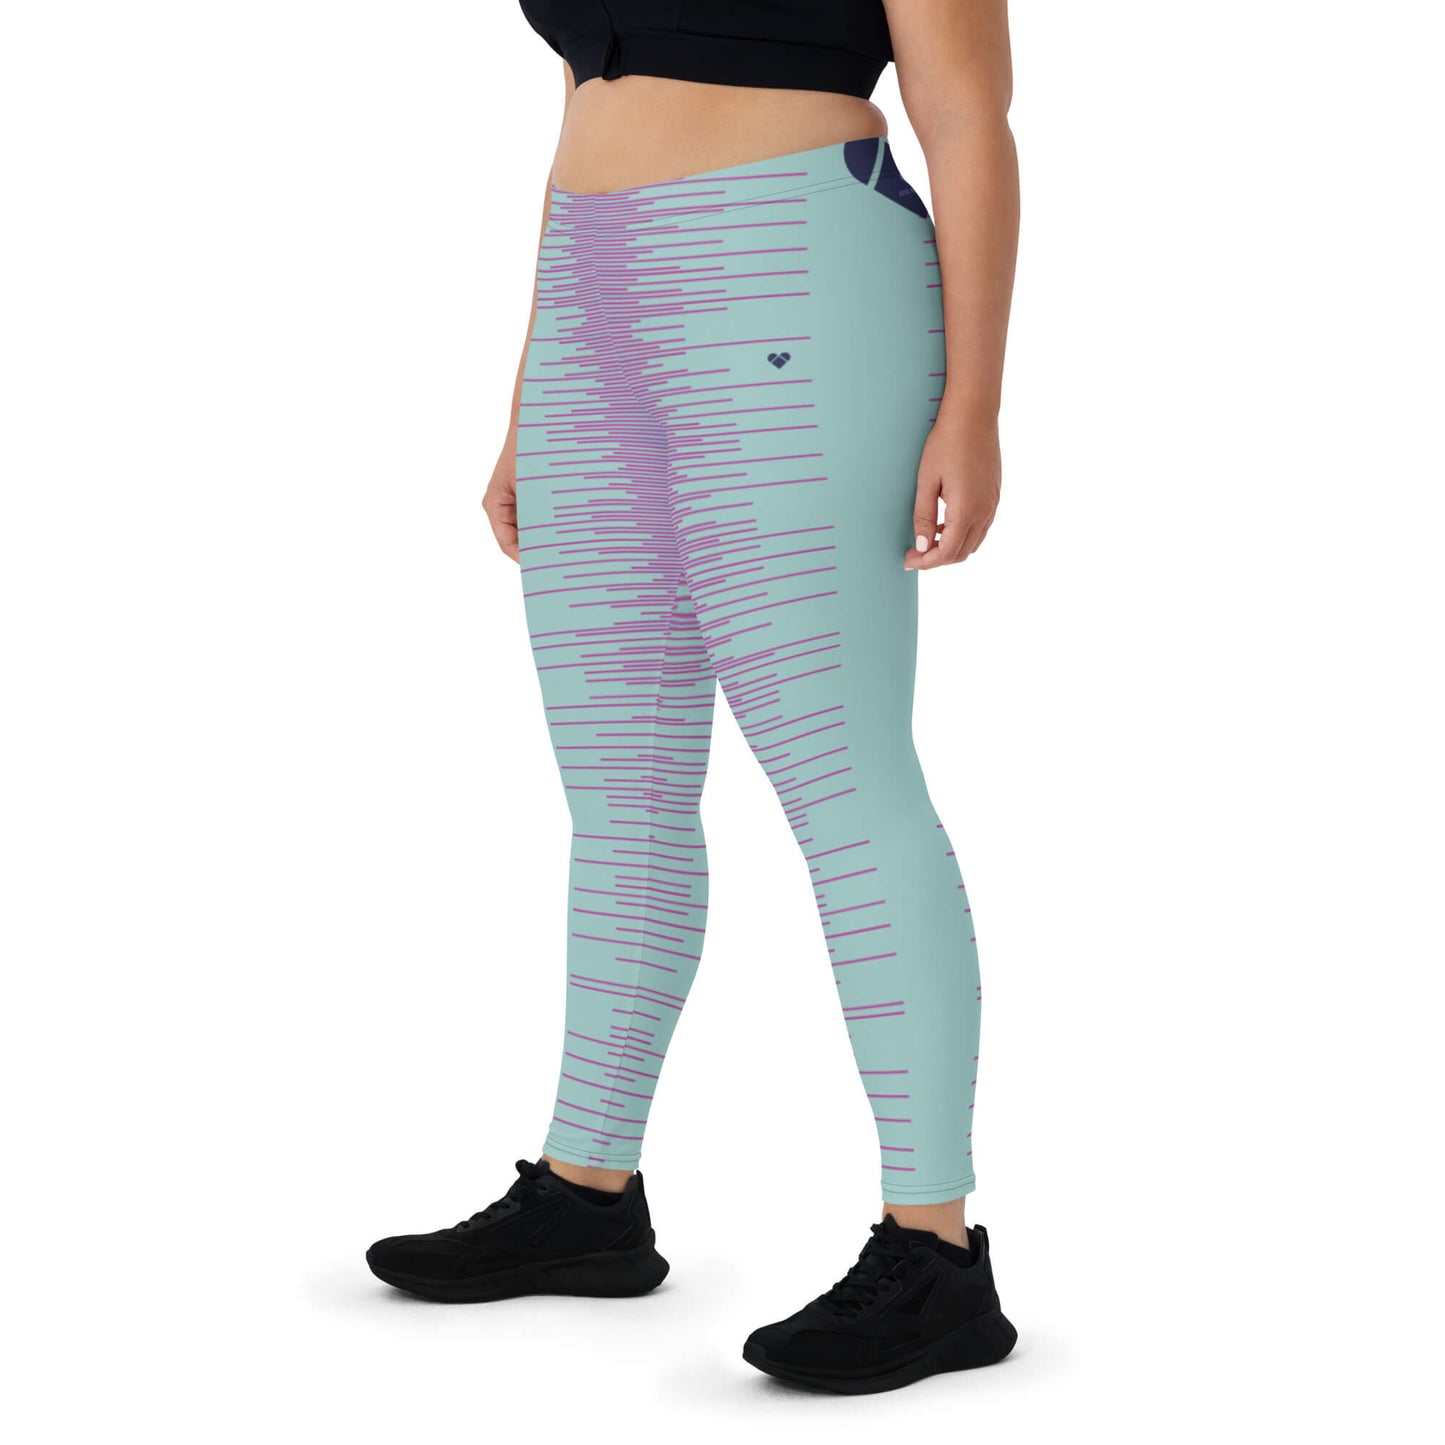 Mint and Pink Striped Leggings - CRiZ AMOR's Amor Dual Capsule